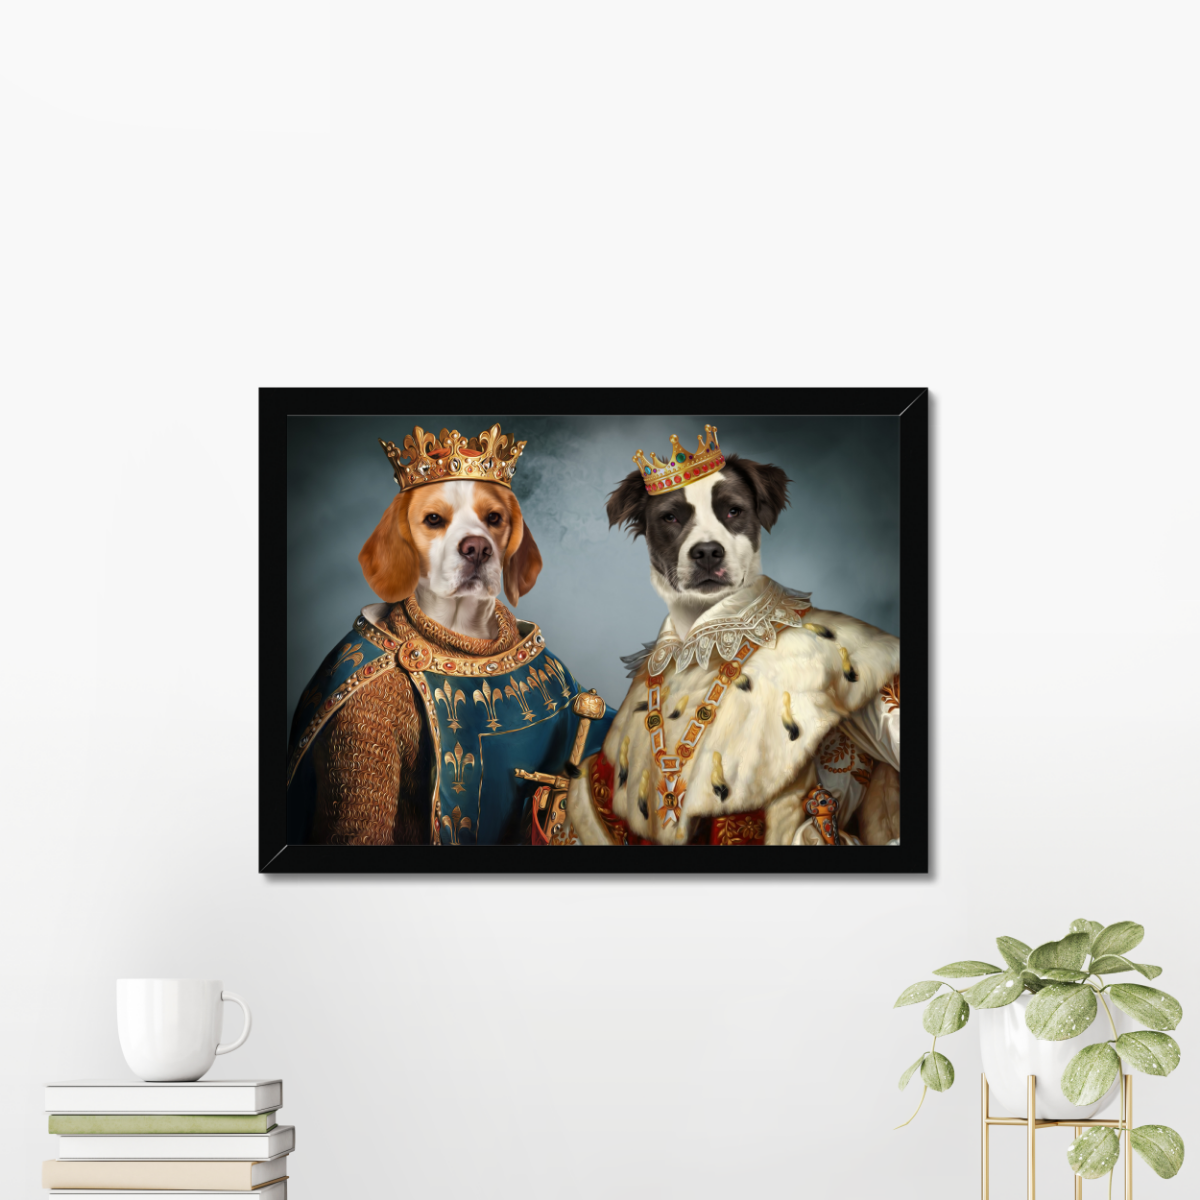 Paw & Glory, paw and glory, creative pet portraits, turn your pet into art, dog picture as king, couple with dog portrait, pet art uk, royalty pet photos, pet portraits